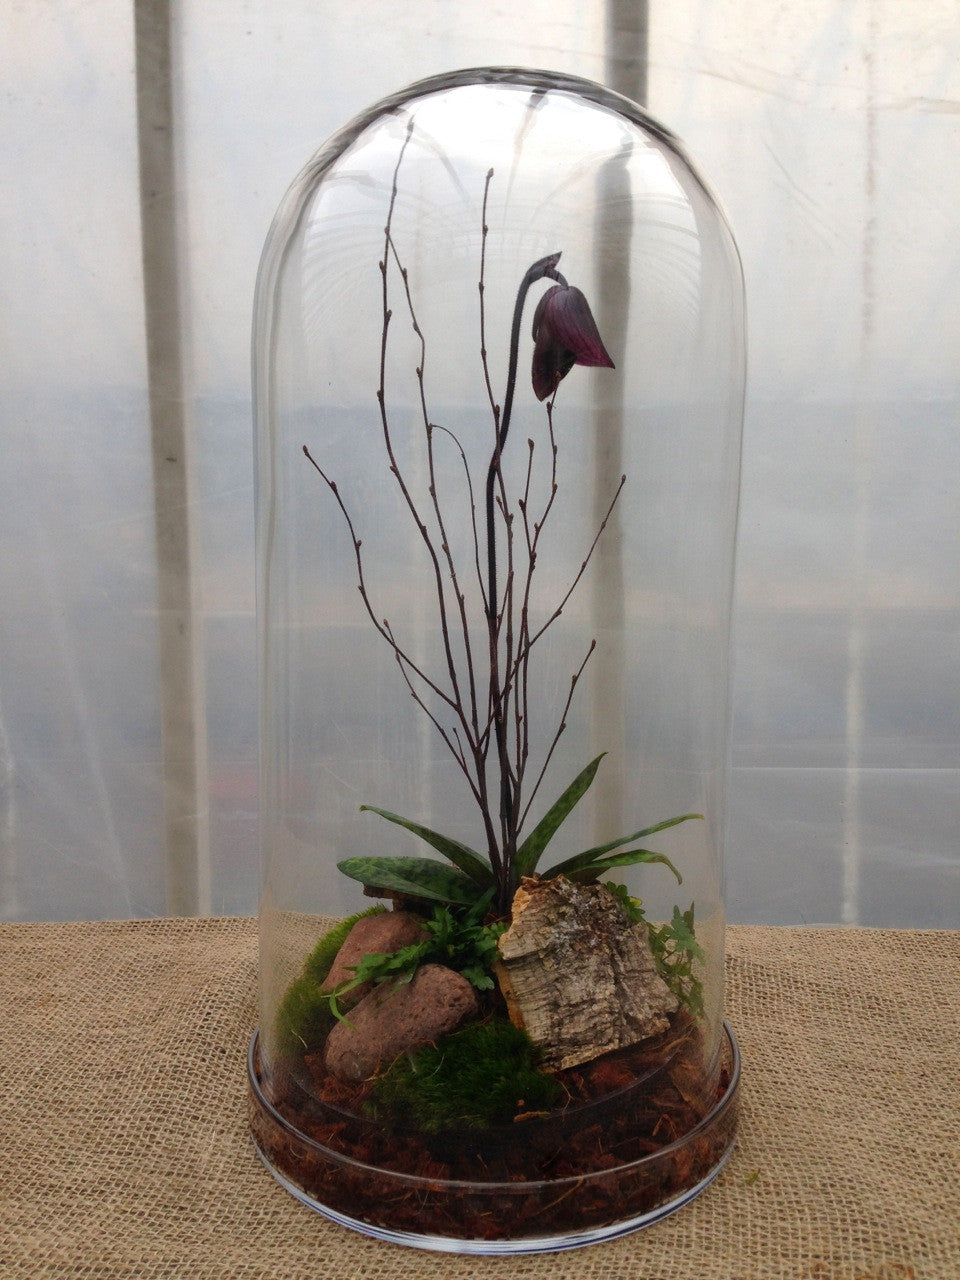 Lady Slipper Orchid Cloche at Michler's in Lexington, KY